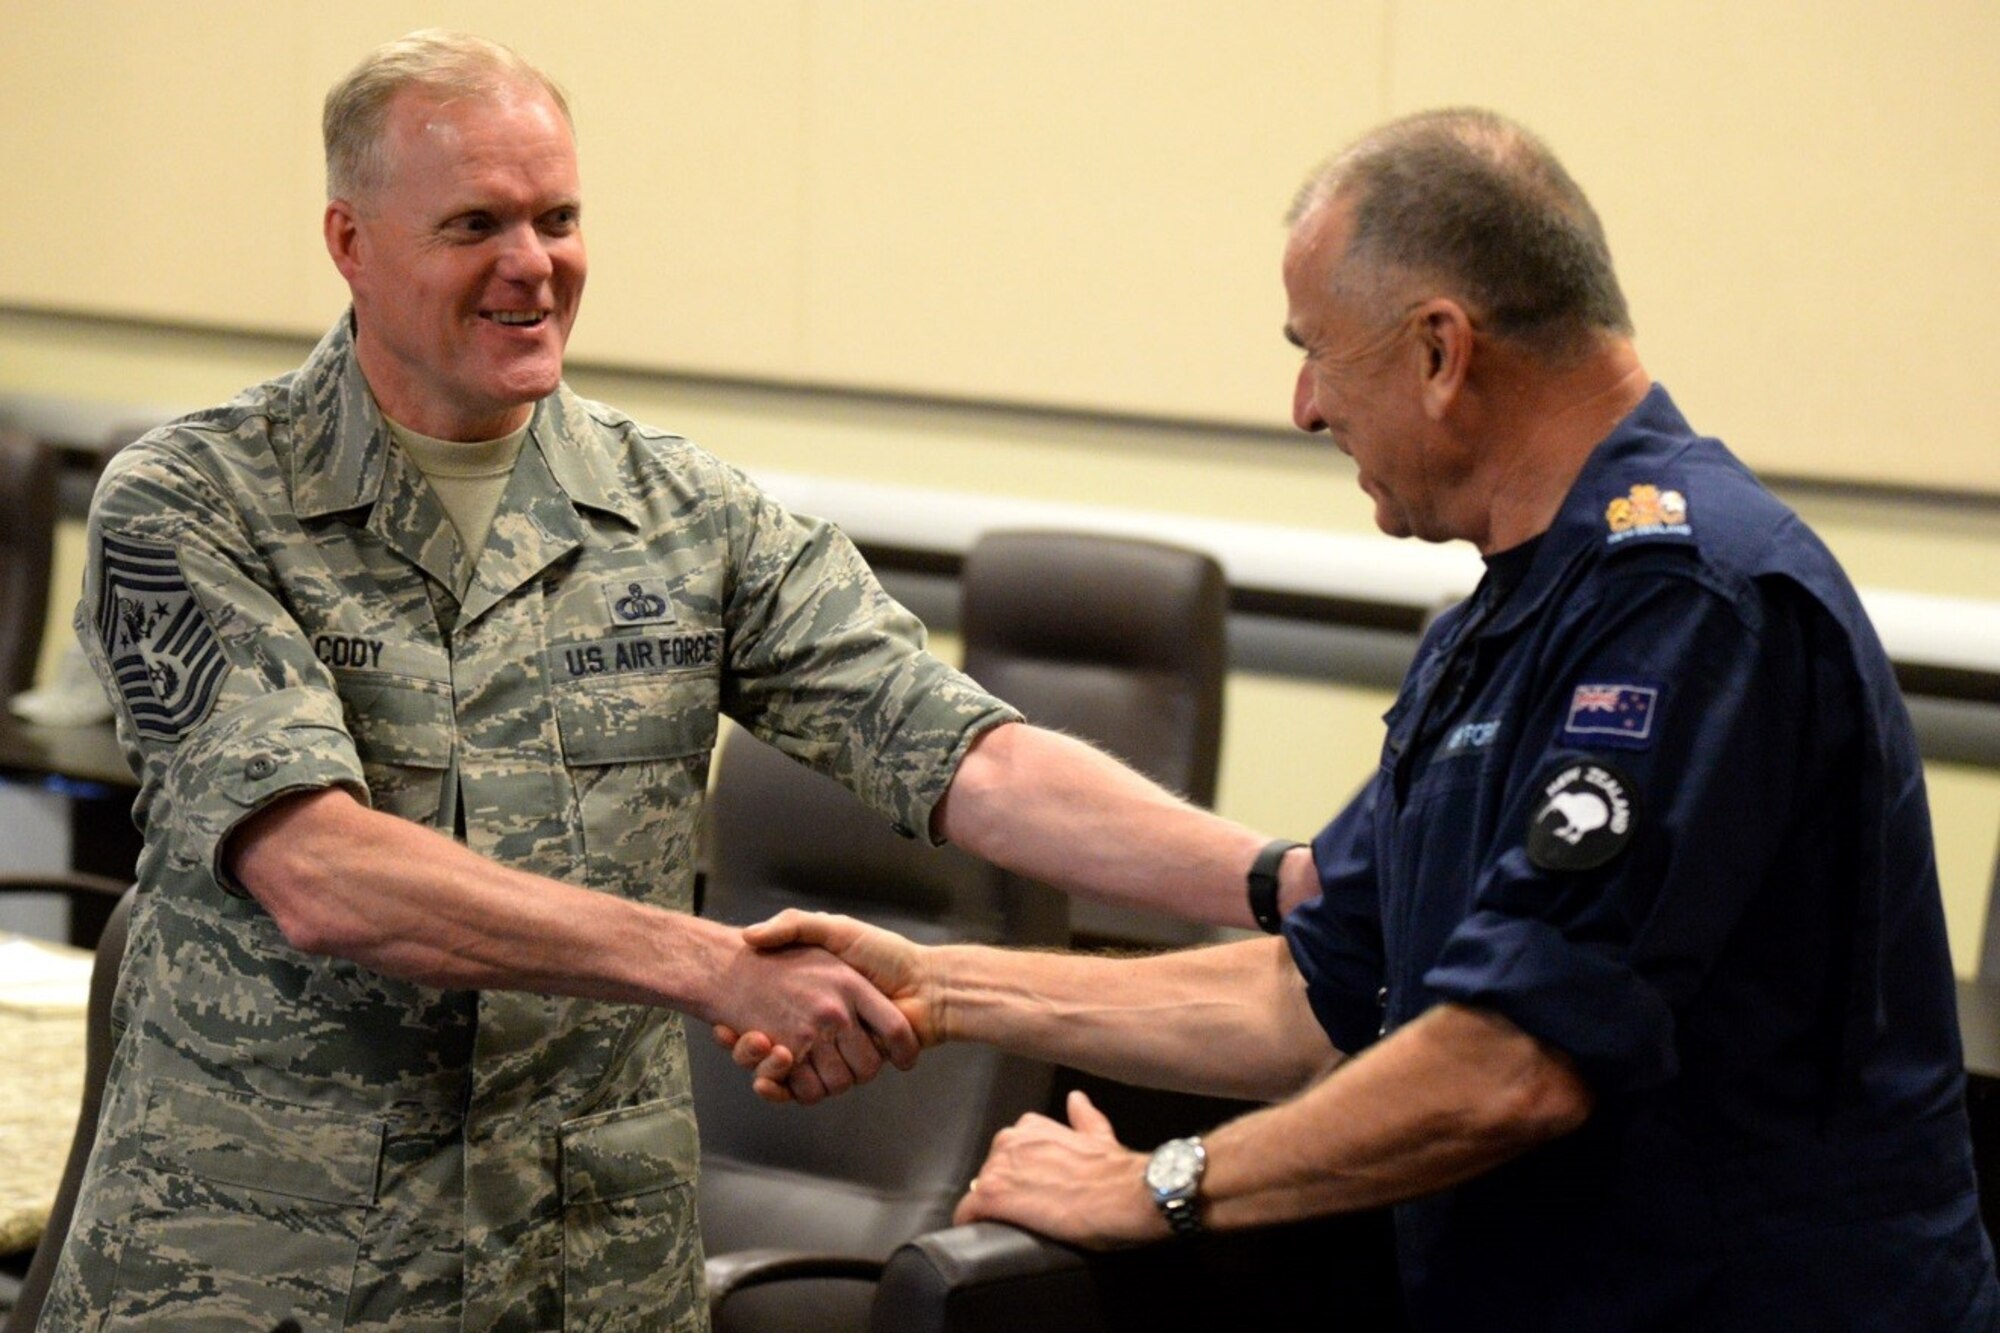 Chief Master Sergeant of the Air Force James A. Cody greets New Zealand Warrant Officer of Air Force Mark Harwood during the Senior Enlisted Leader International Summit (SELIS) on Joint Base Andrews, Md., July 13, 2016. The SELIS is a forum of international senior enlisted leaders hosted by the CMSAF. (U.S. Air Force photo/ Tech. Sgt. Matt Davis)